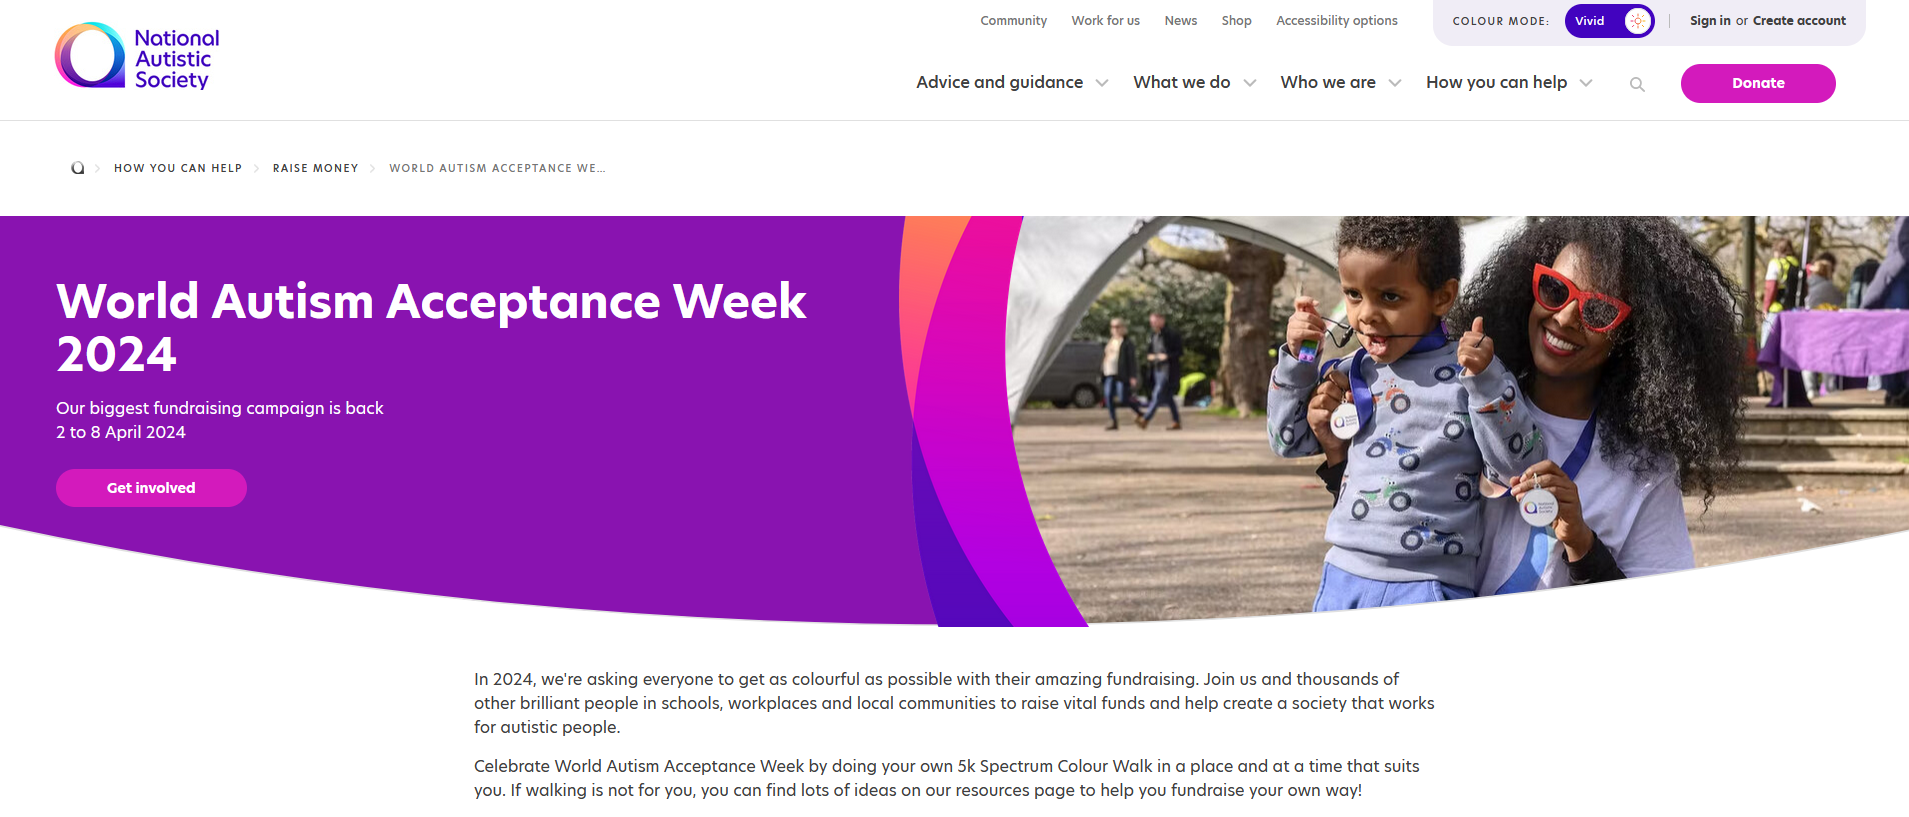 The photo is a screenshot of the National Autistic Society's page about the World Autism Acceptance Week 2024.